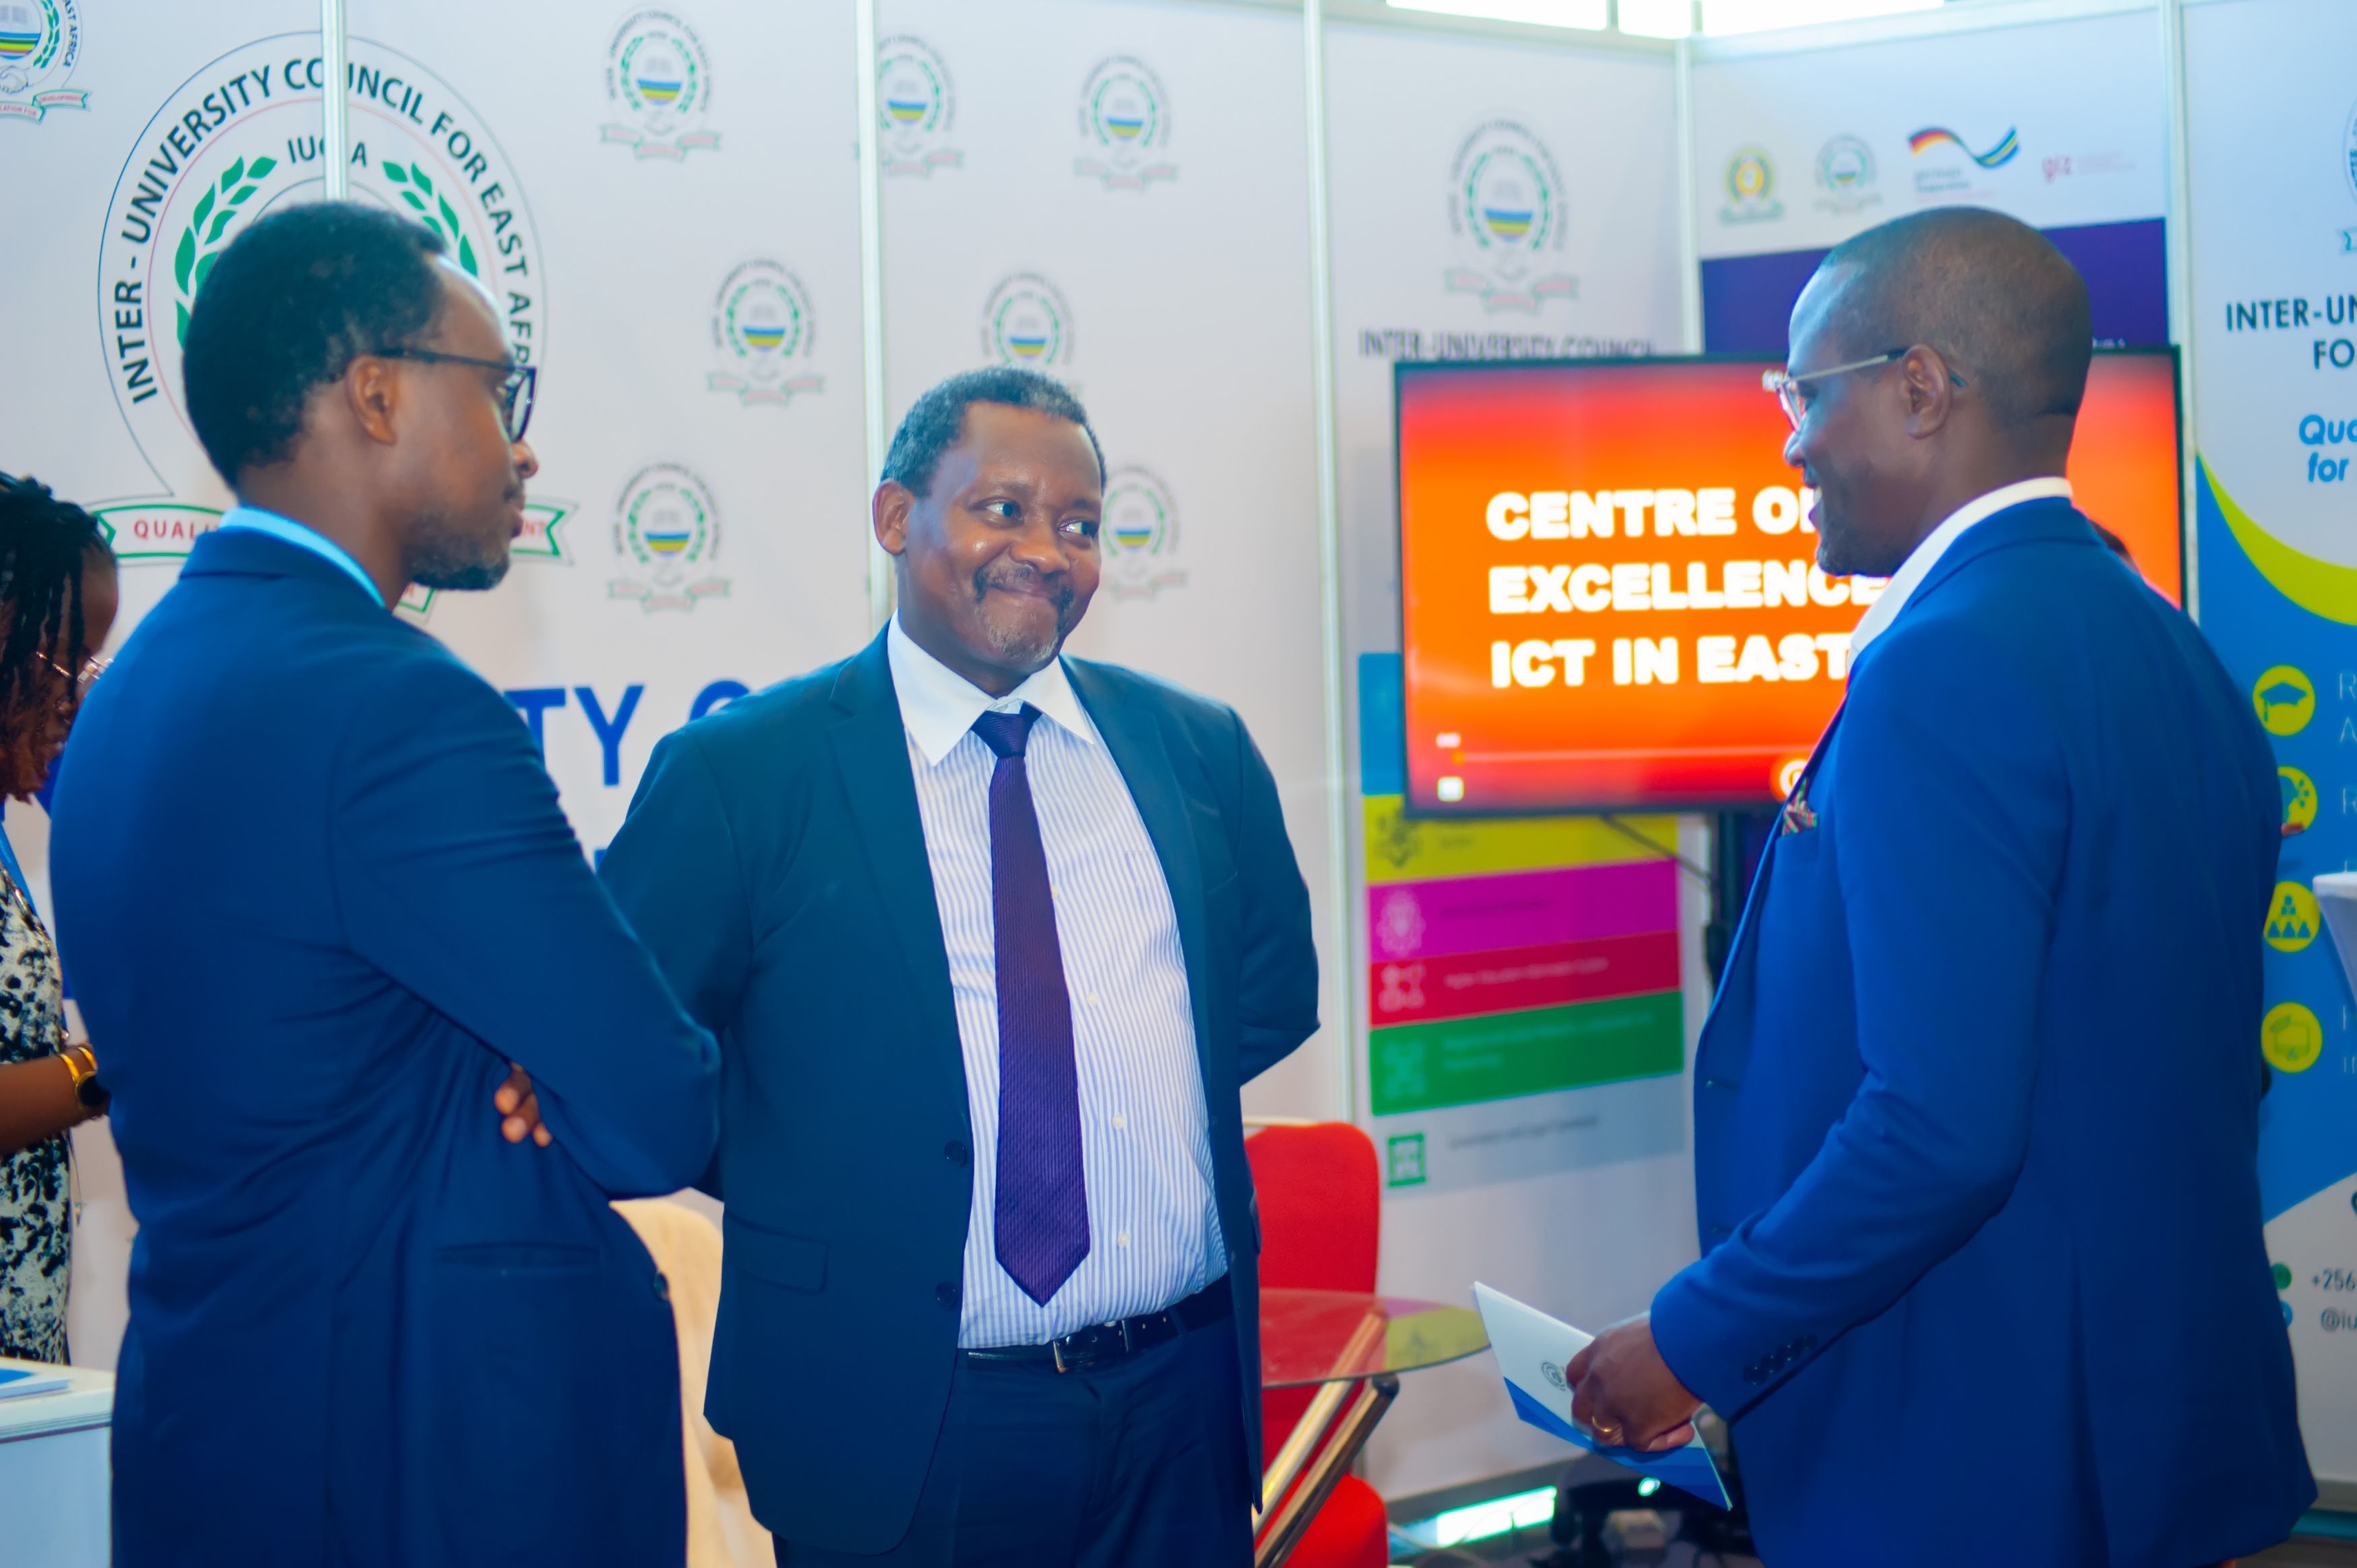 dSkills@EA Promotes Research and Innovation in EAC at the Grand Challenges Rwanda (GIZ)